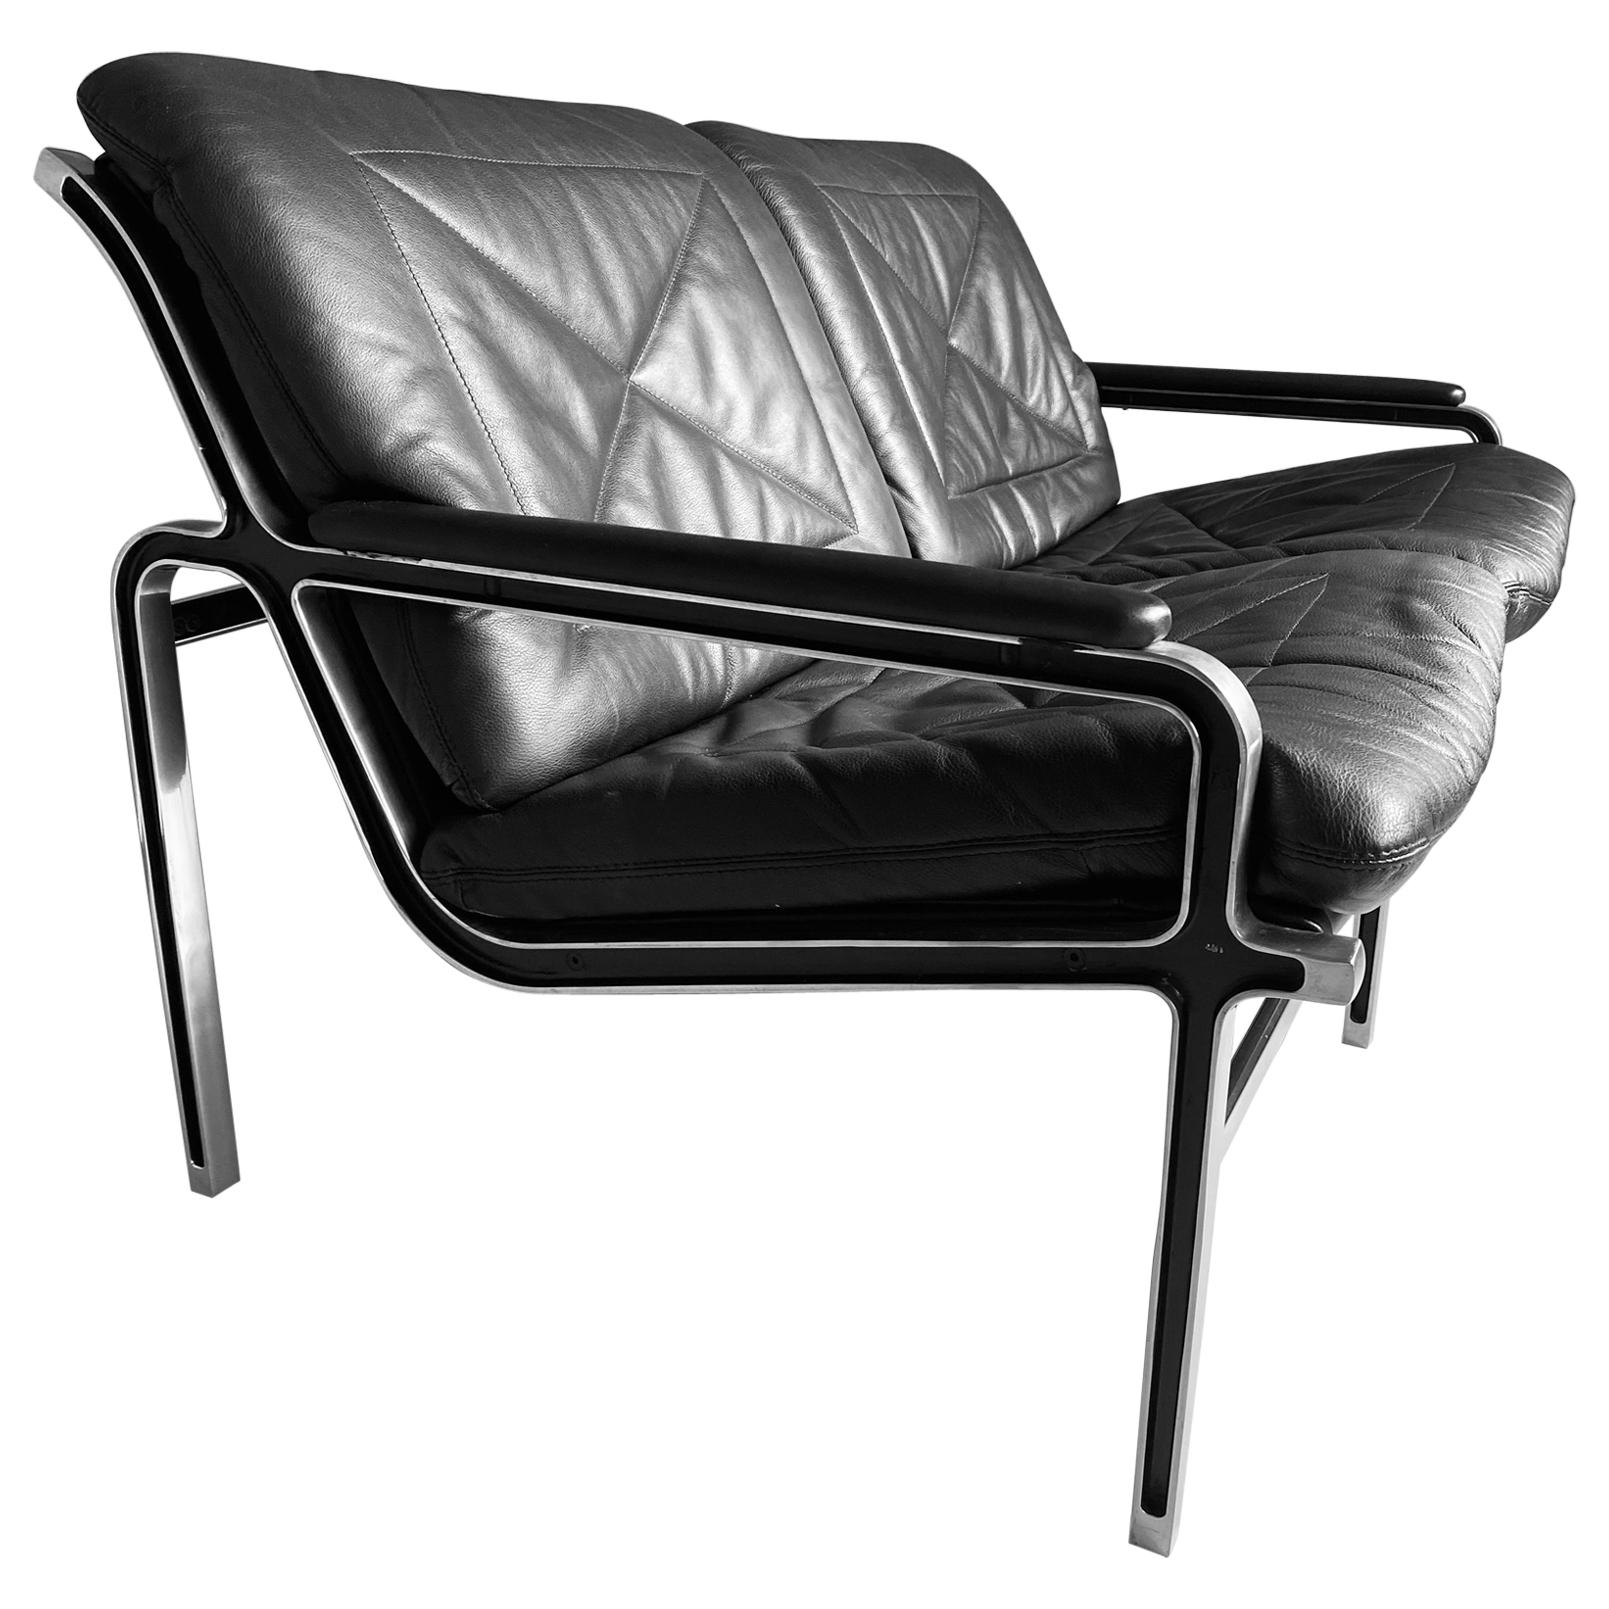 Andre Vanden Beuck Aluminium and Black Leather Sofa For Sale